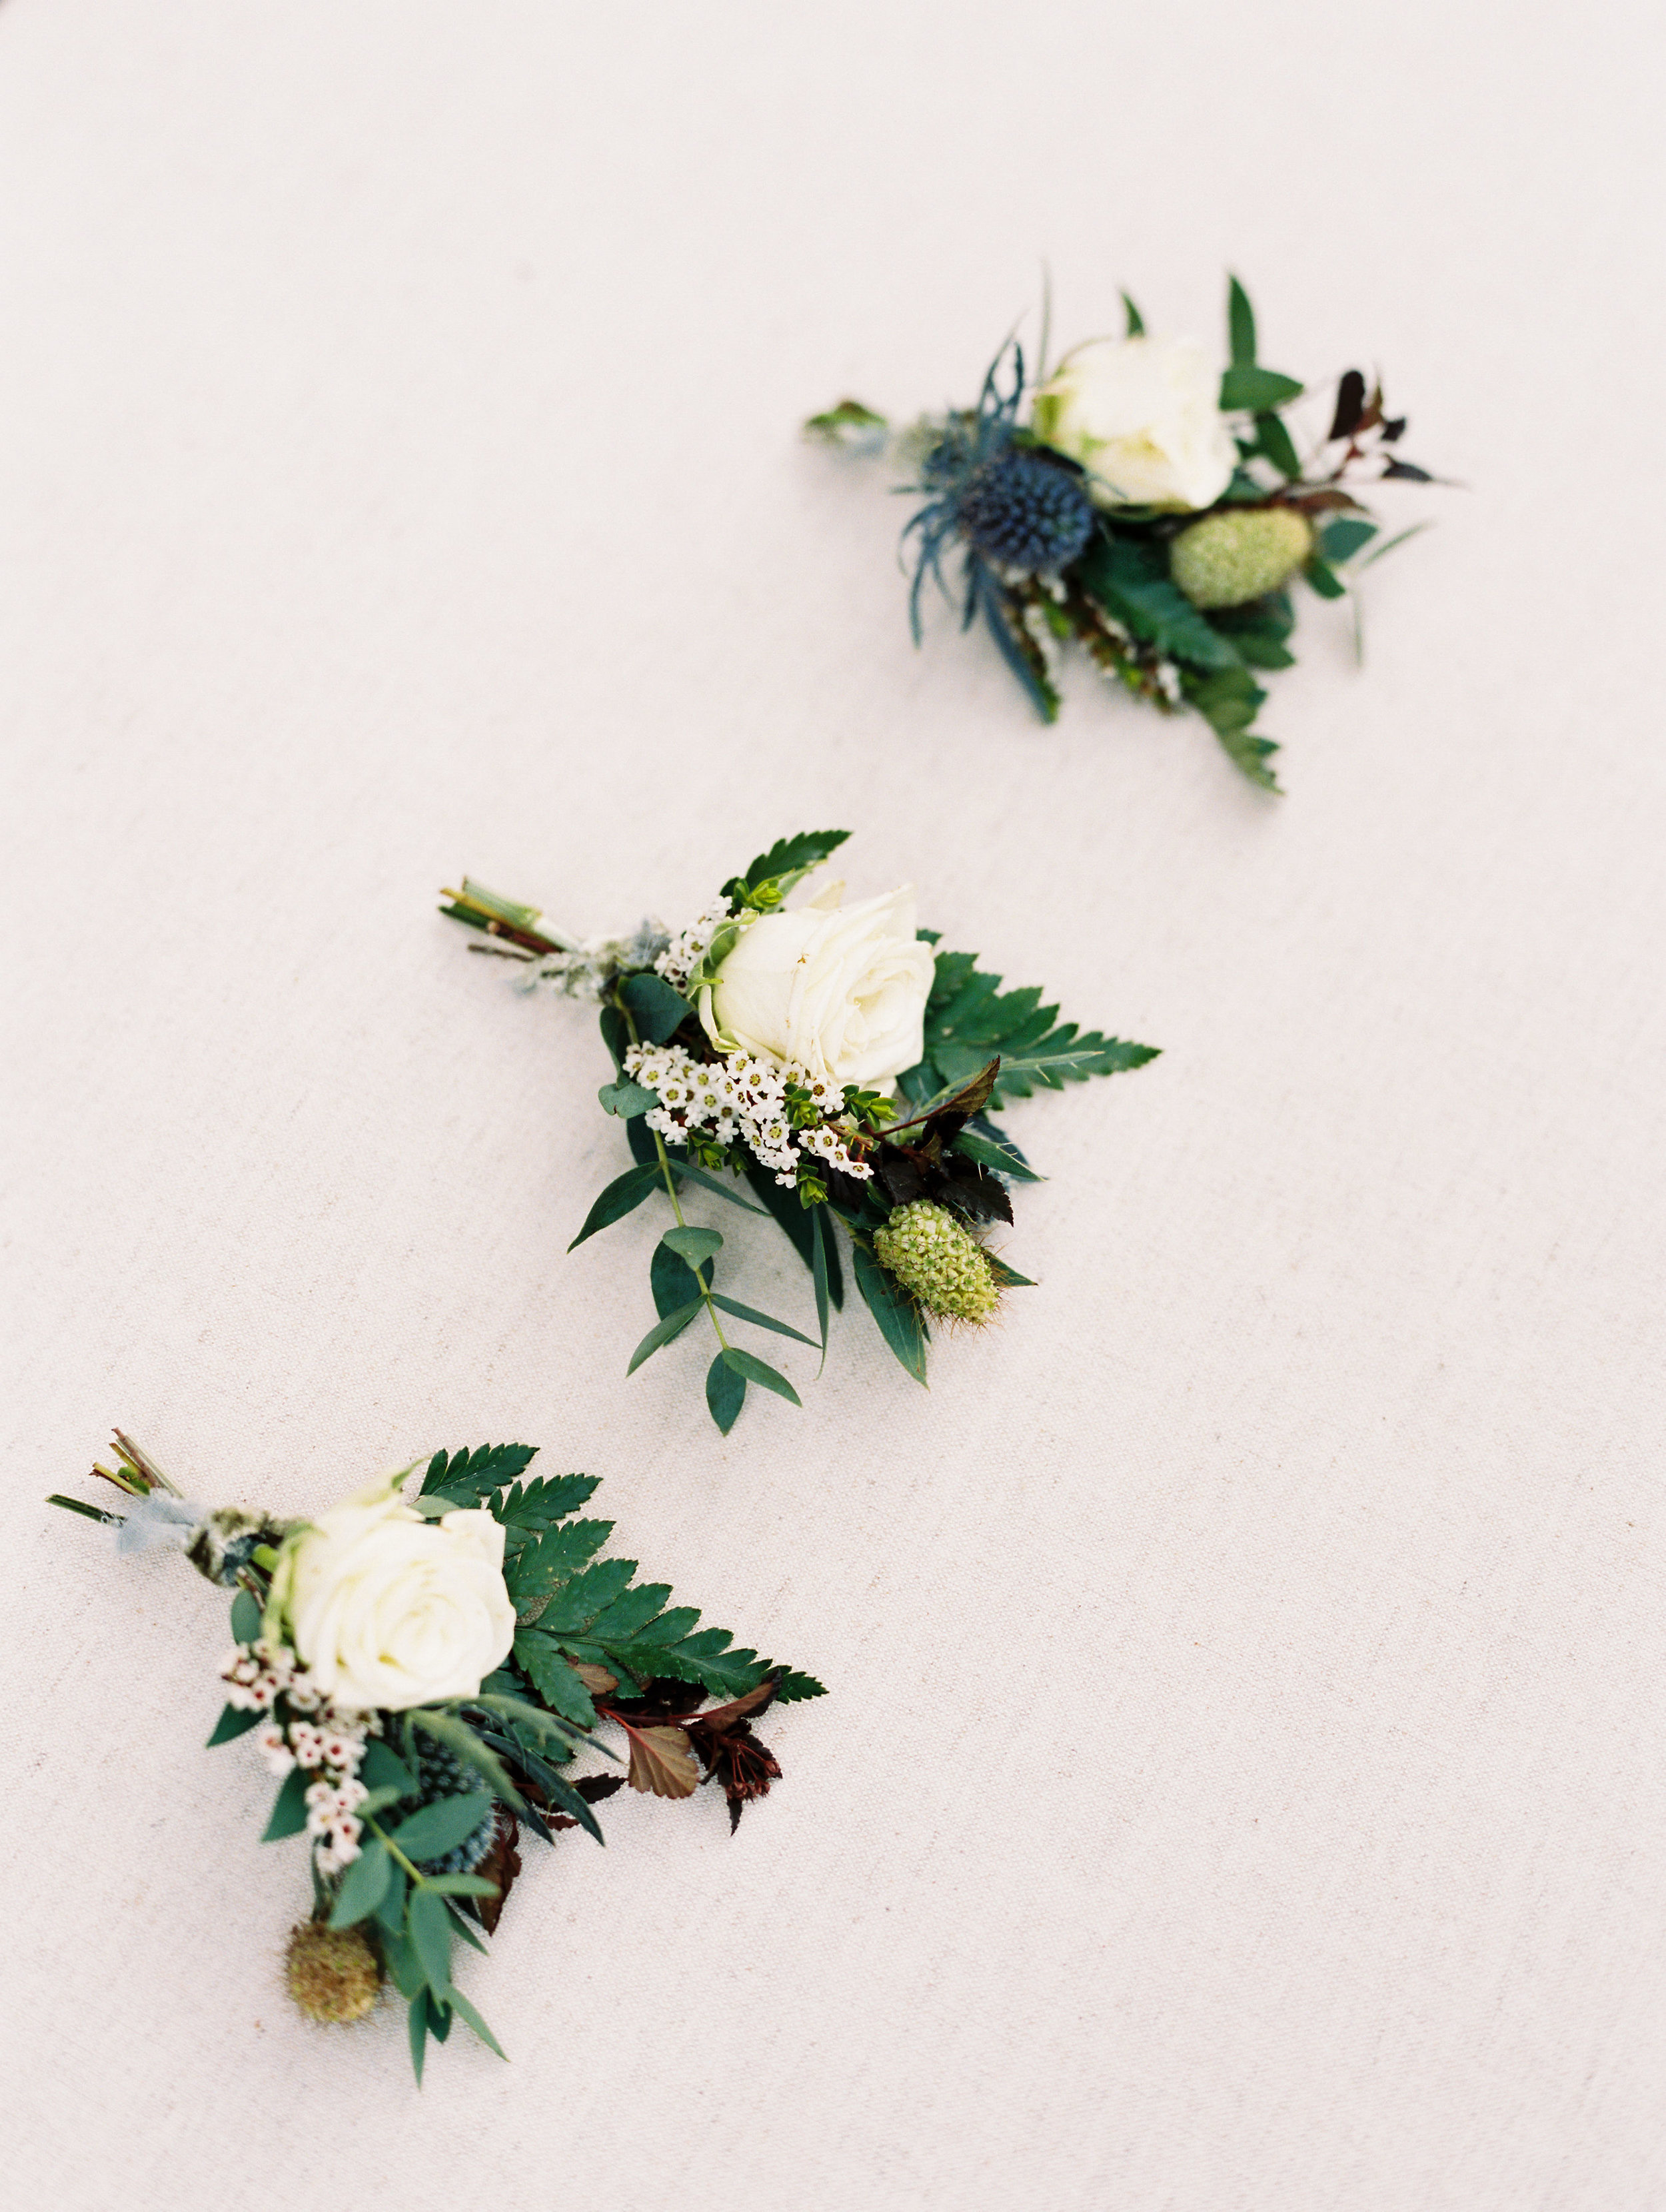 Texture boutonnieres with blue thistles and greenery. Destination Wedding Floral Design